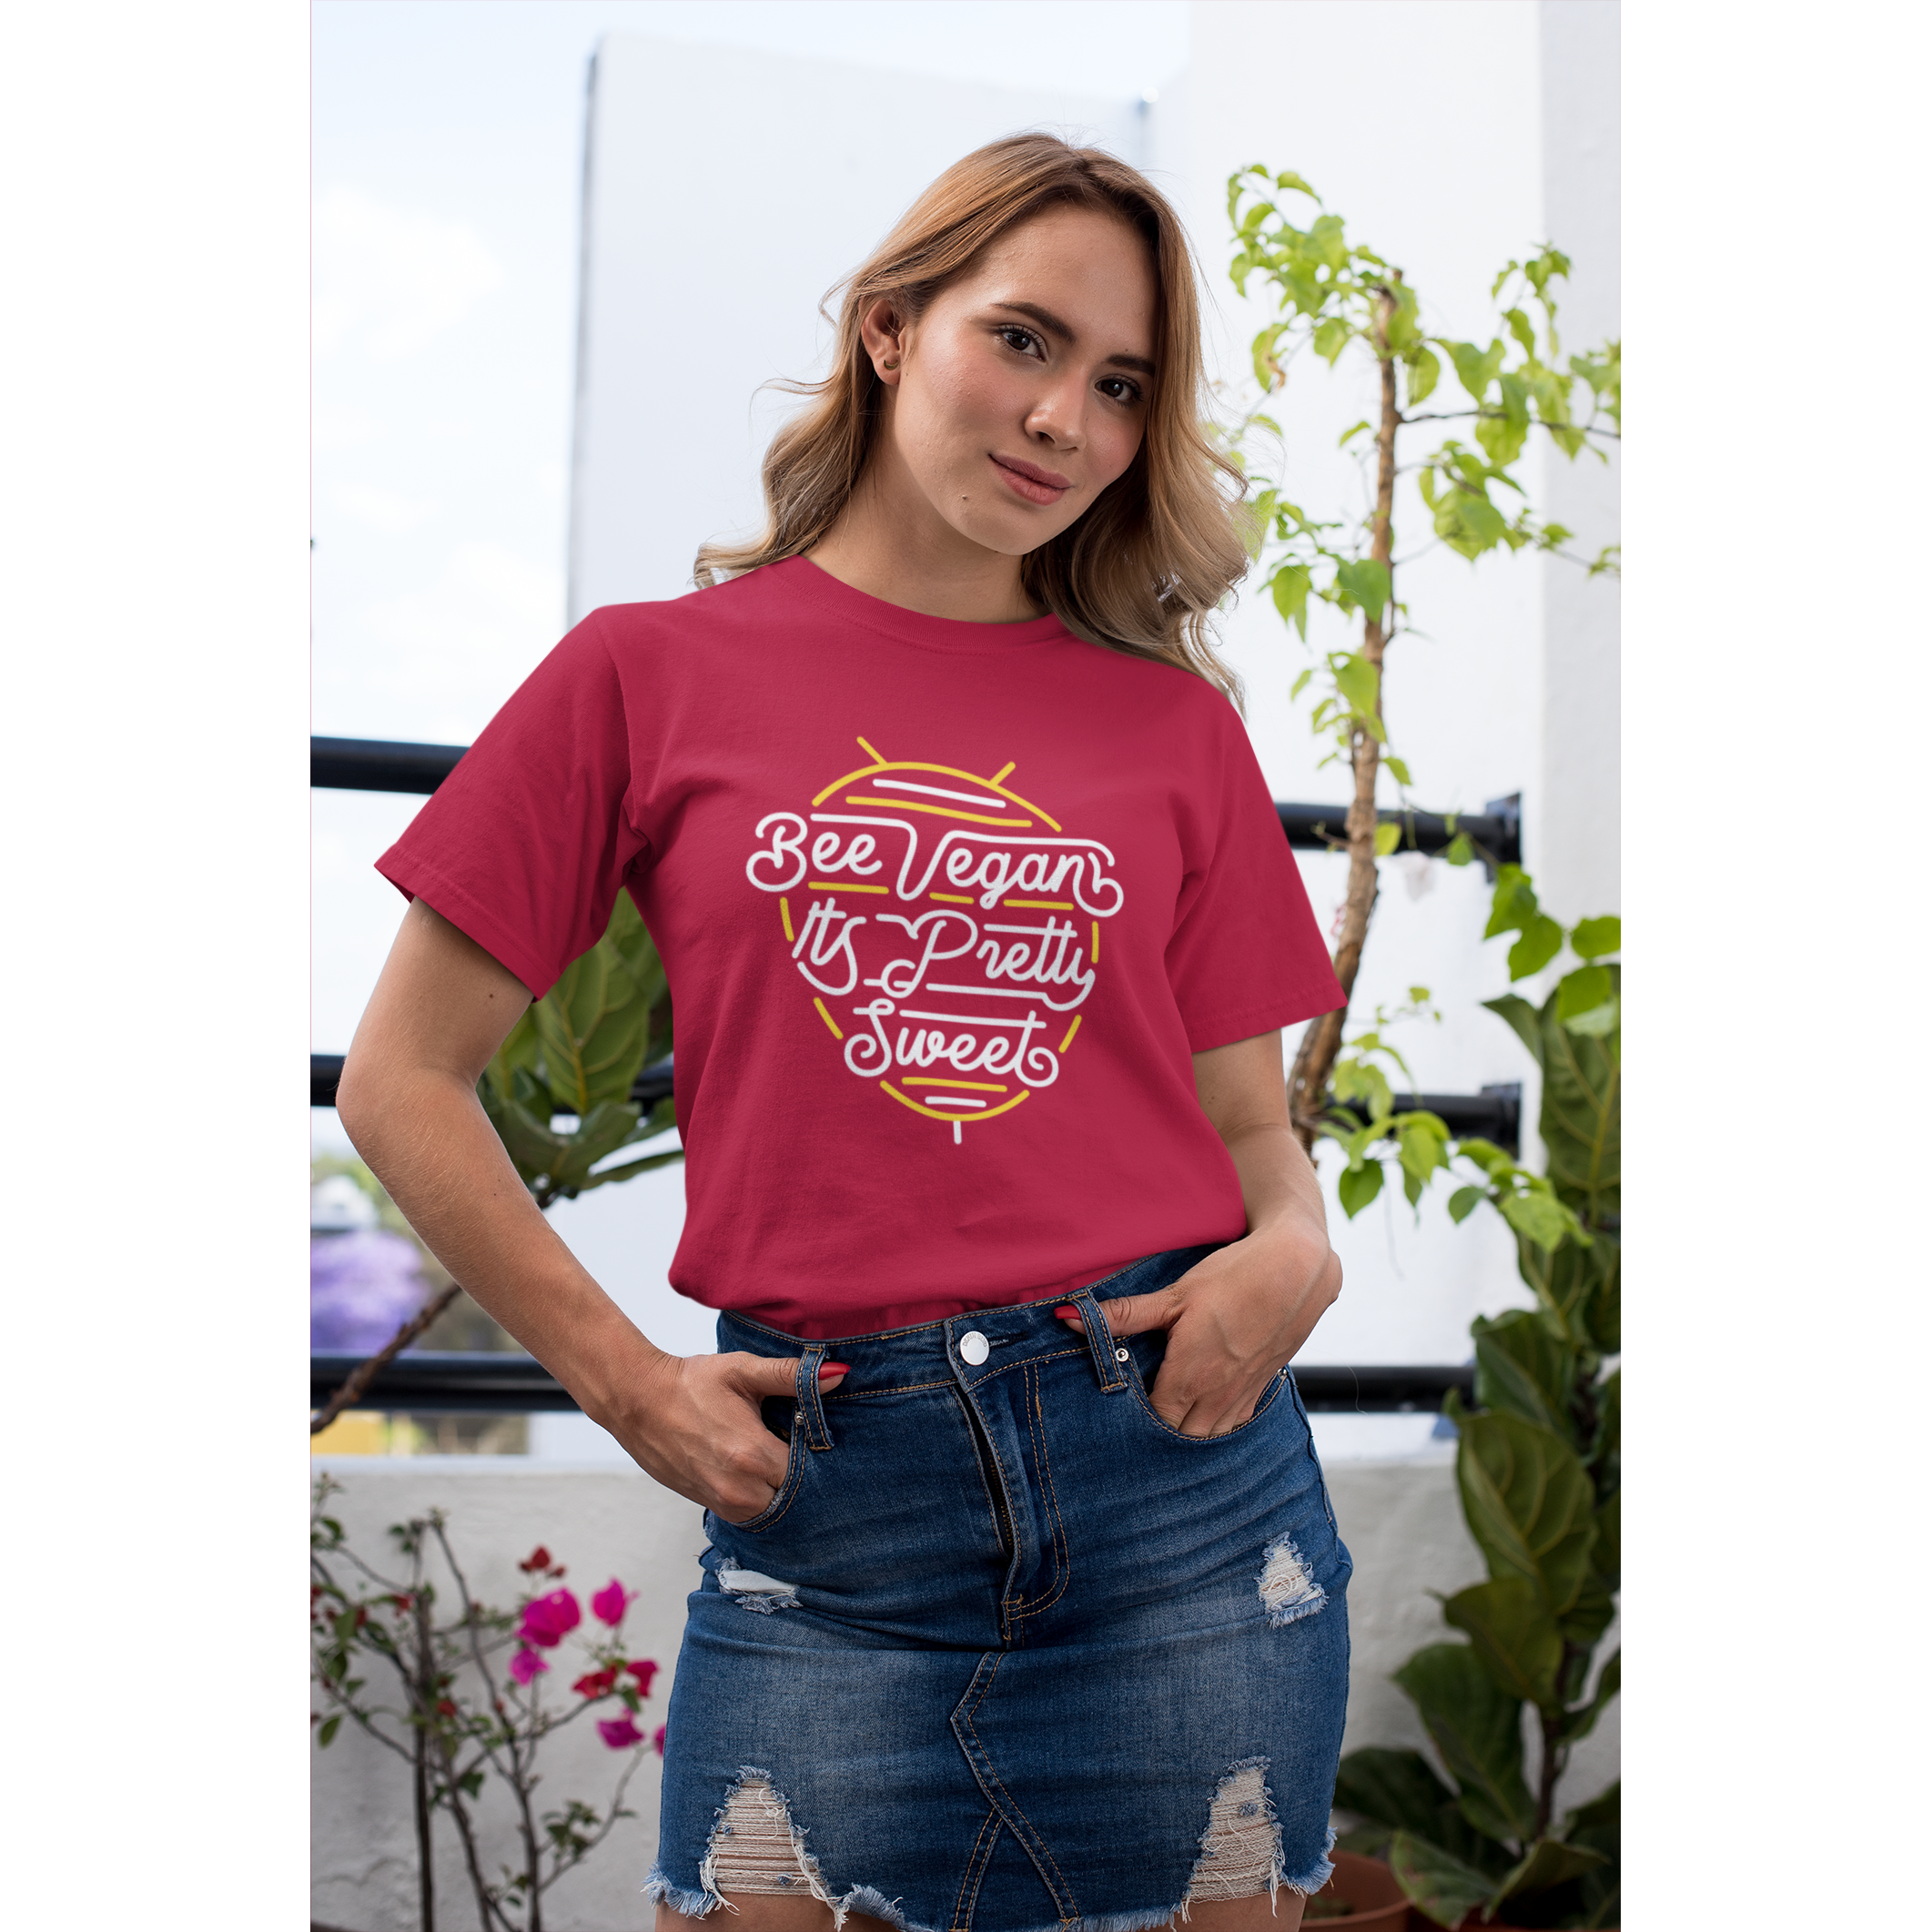 cool young tan woman standing on balcony with plants wearing bee vegan it's pretty sweet neon sign graphic design on red colored vegan t shirt from vegan shirts from ethical clothing brands